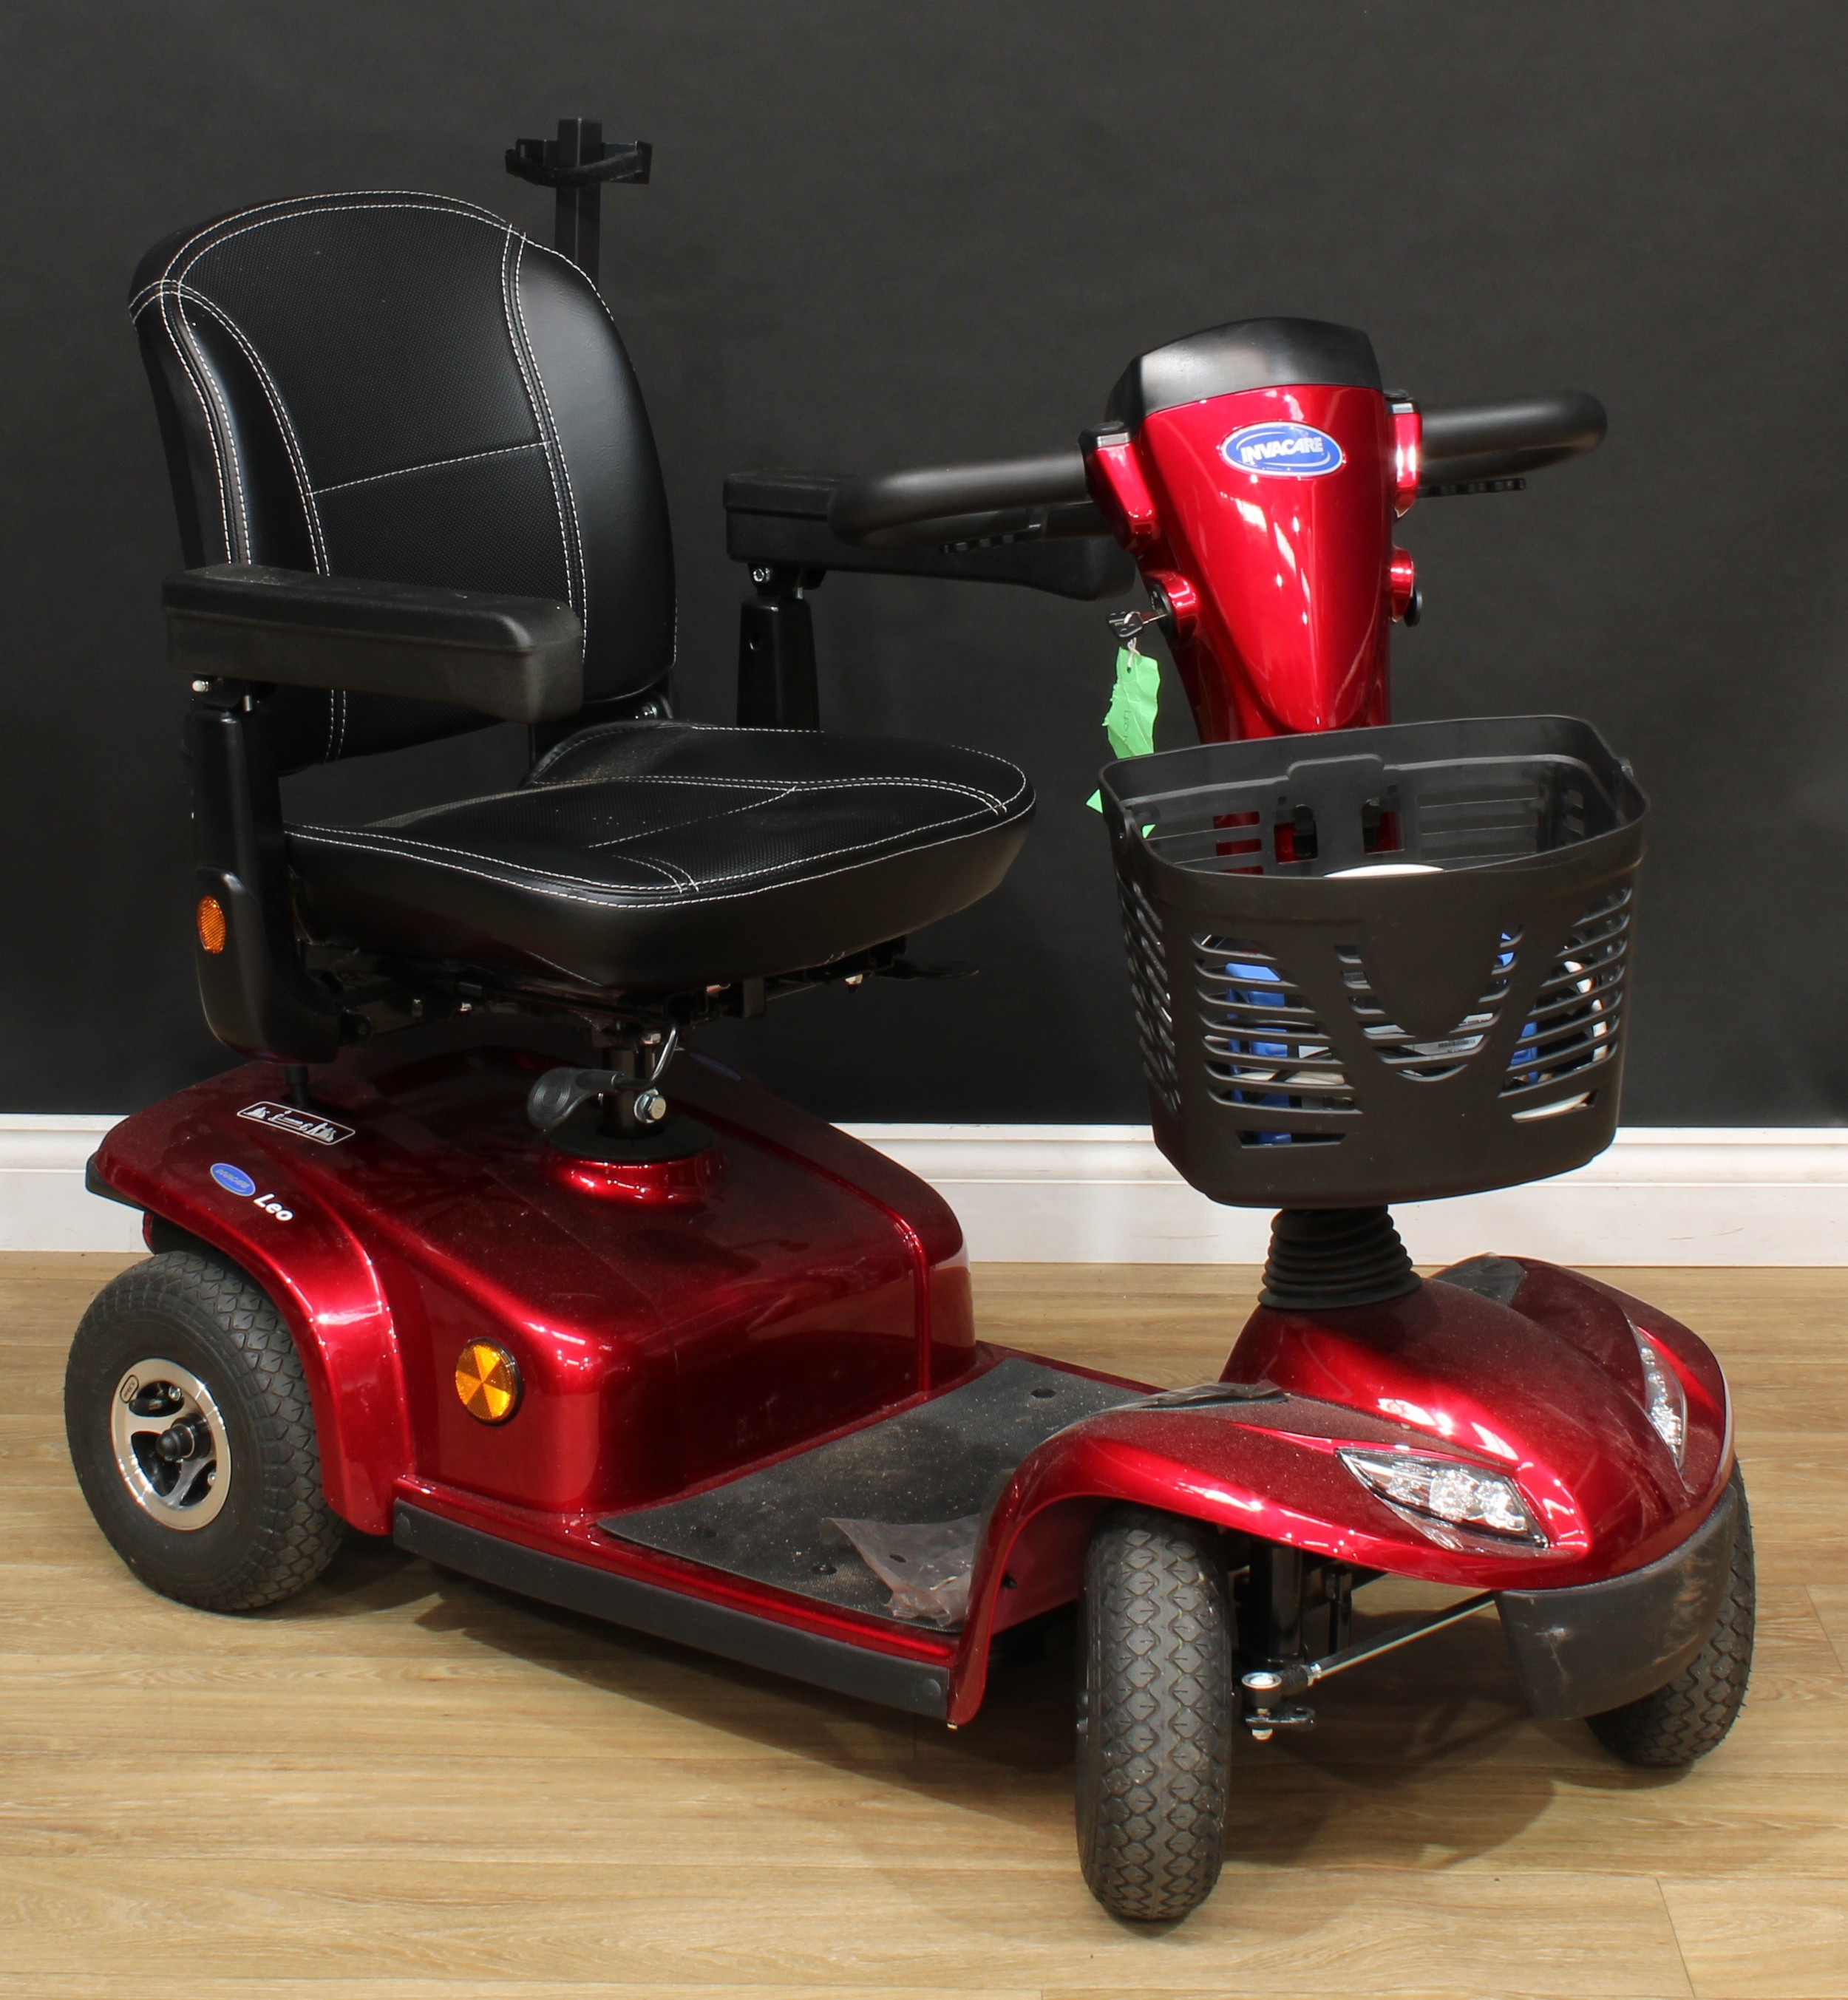 An Invacare Leo mobility scooter